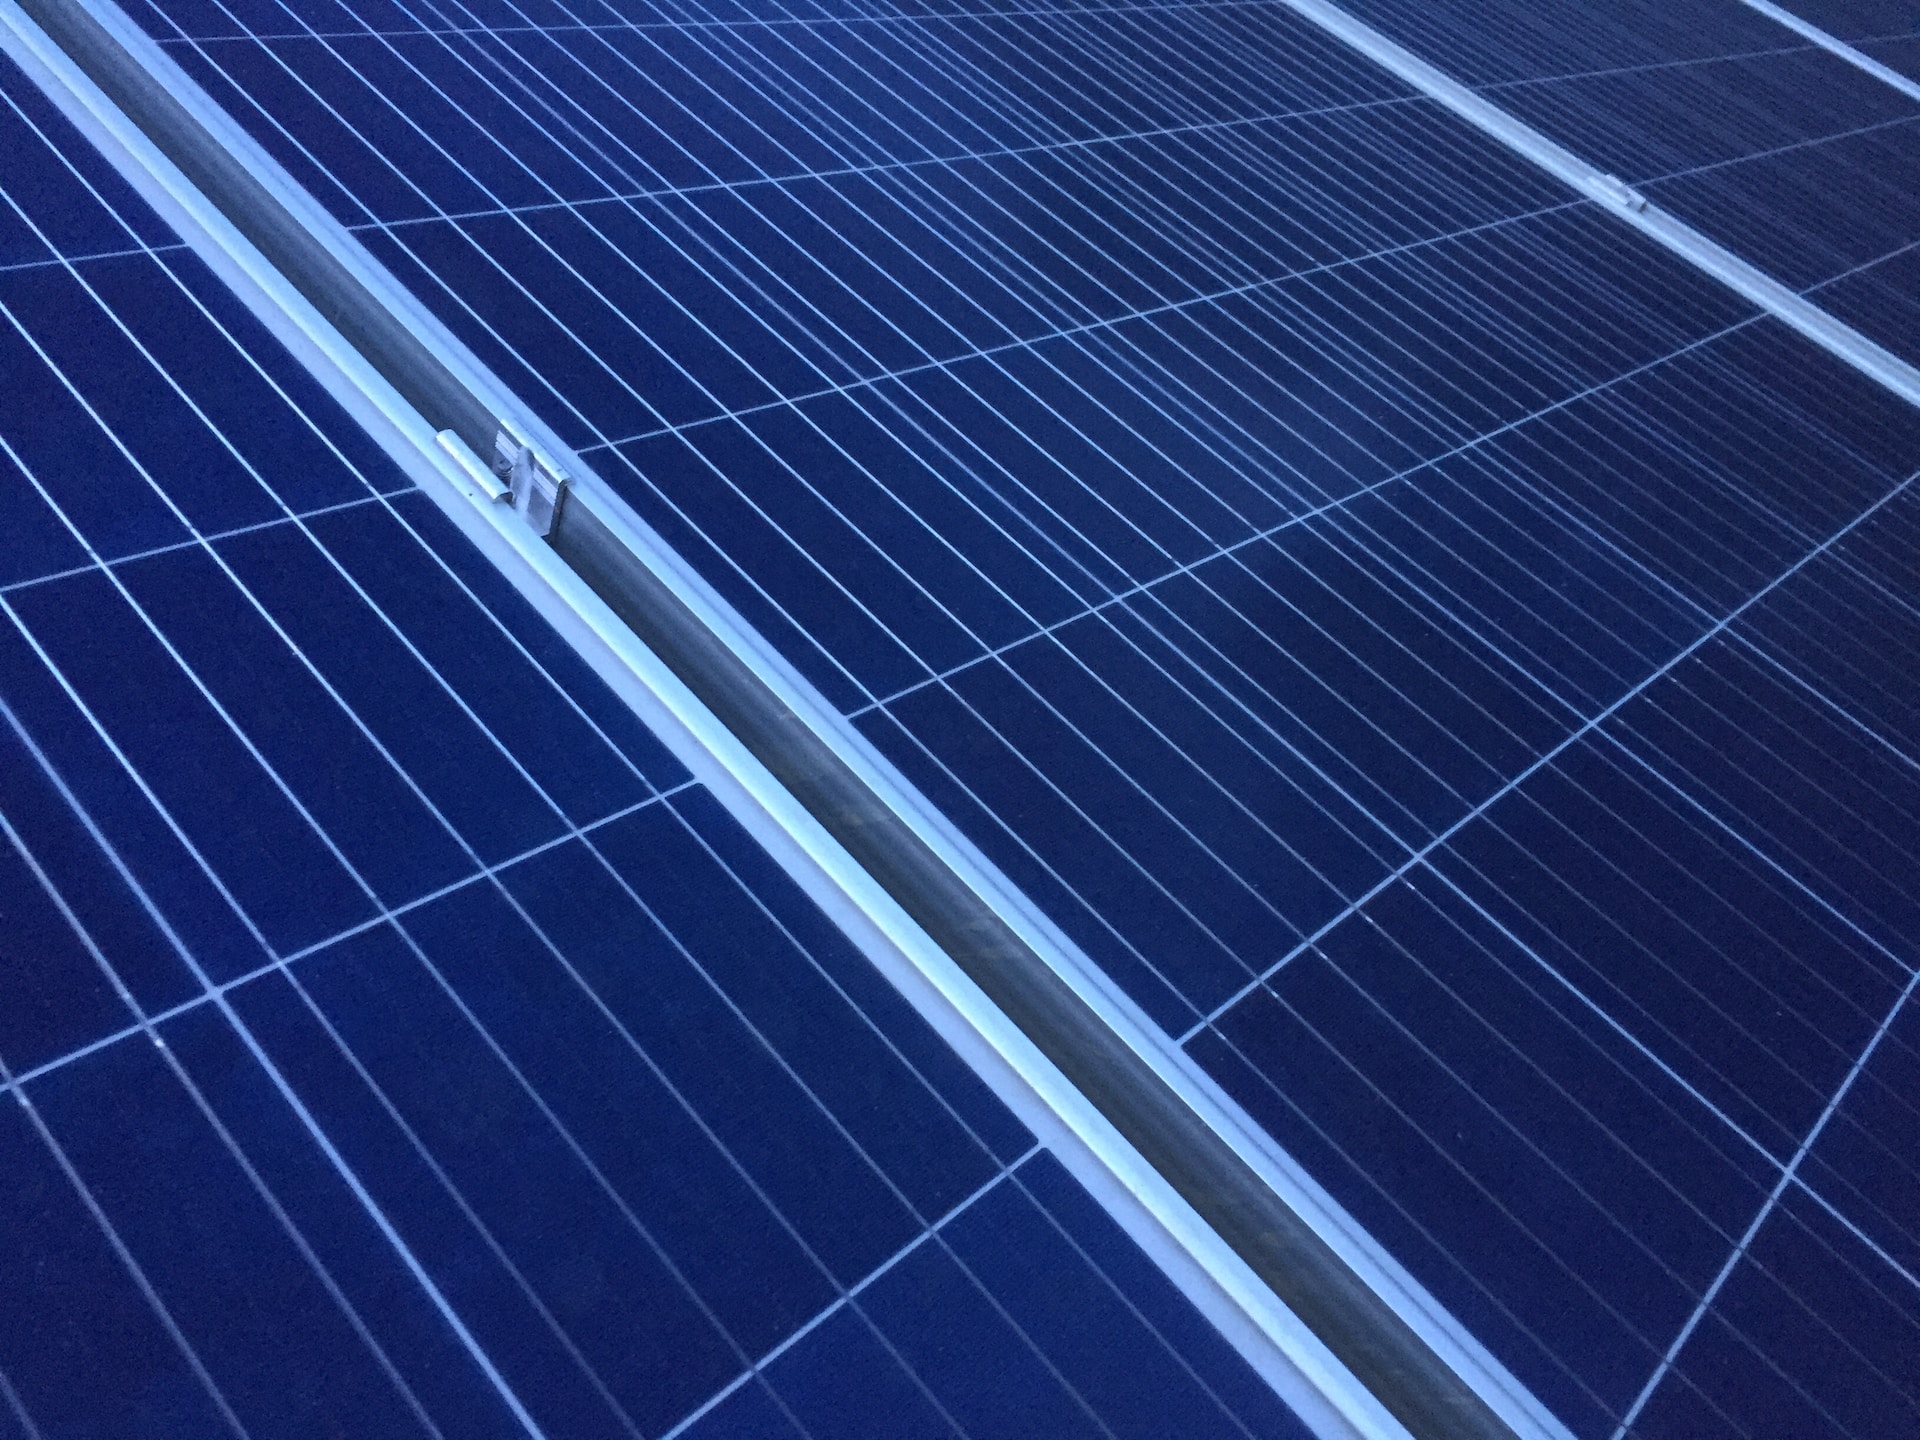 Photo of a series of solar panels by Jadon Kelly (from unsplash.com)